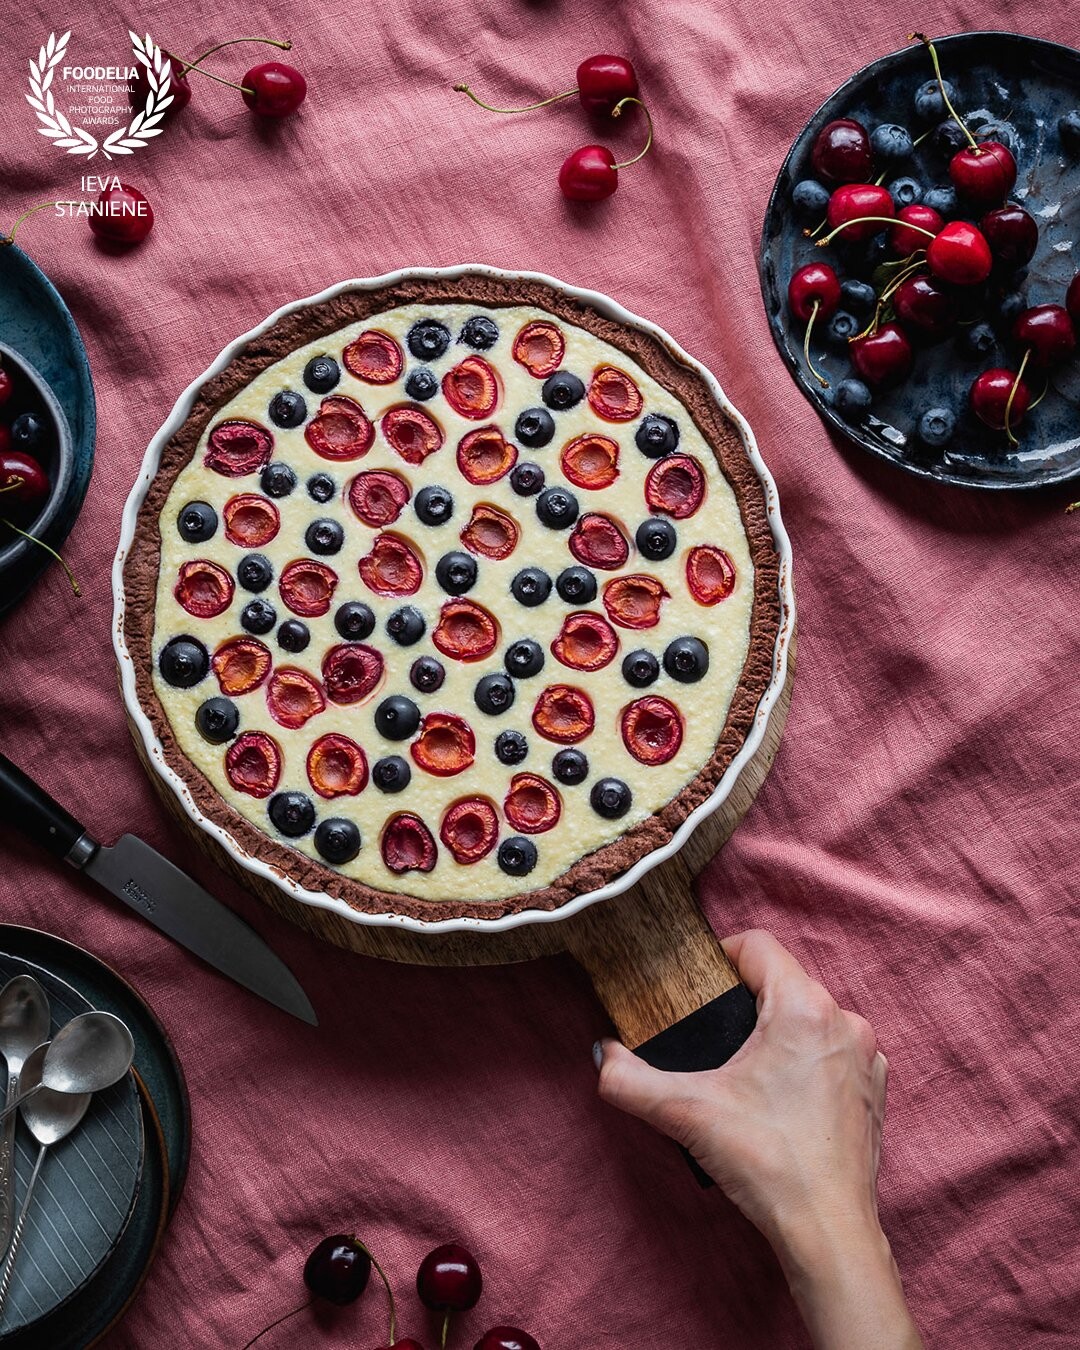 The perfect taste of summer. When we have cherries, blueberries and, actually, all other berries, it’s just the perfect time to make desserts with them.<br />
<br />
As for the shot I wanted this pie to stand out from the frame. Color choice helped to make it happen.